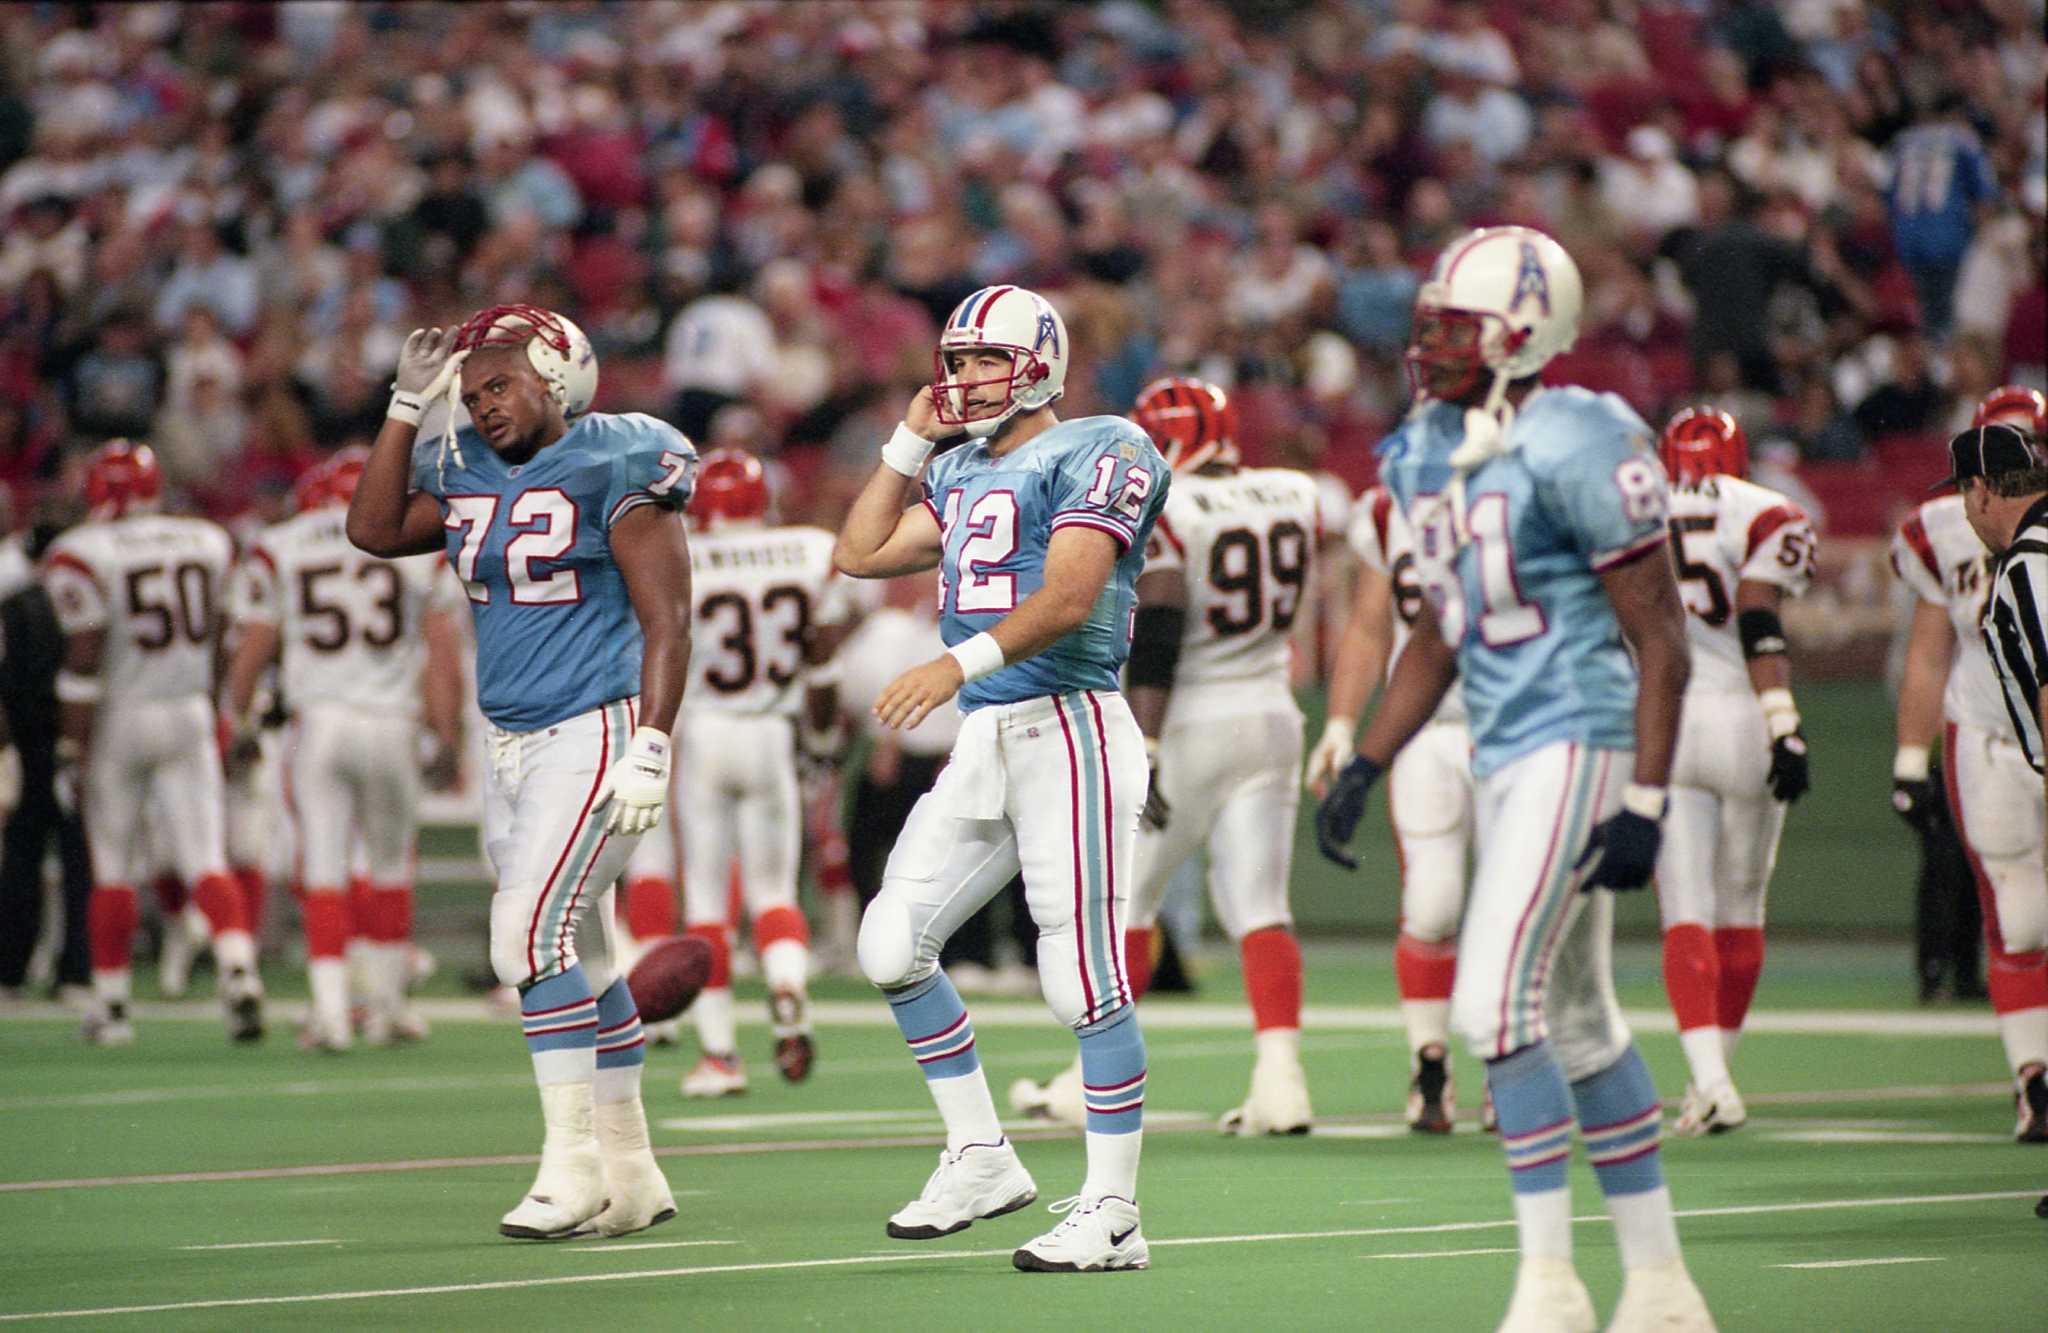 Remember when: Houston Oilers played their last home game at the Astrodome